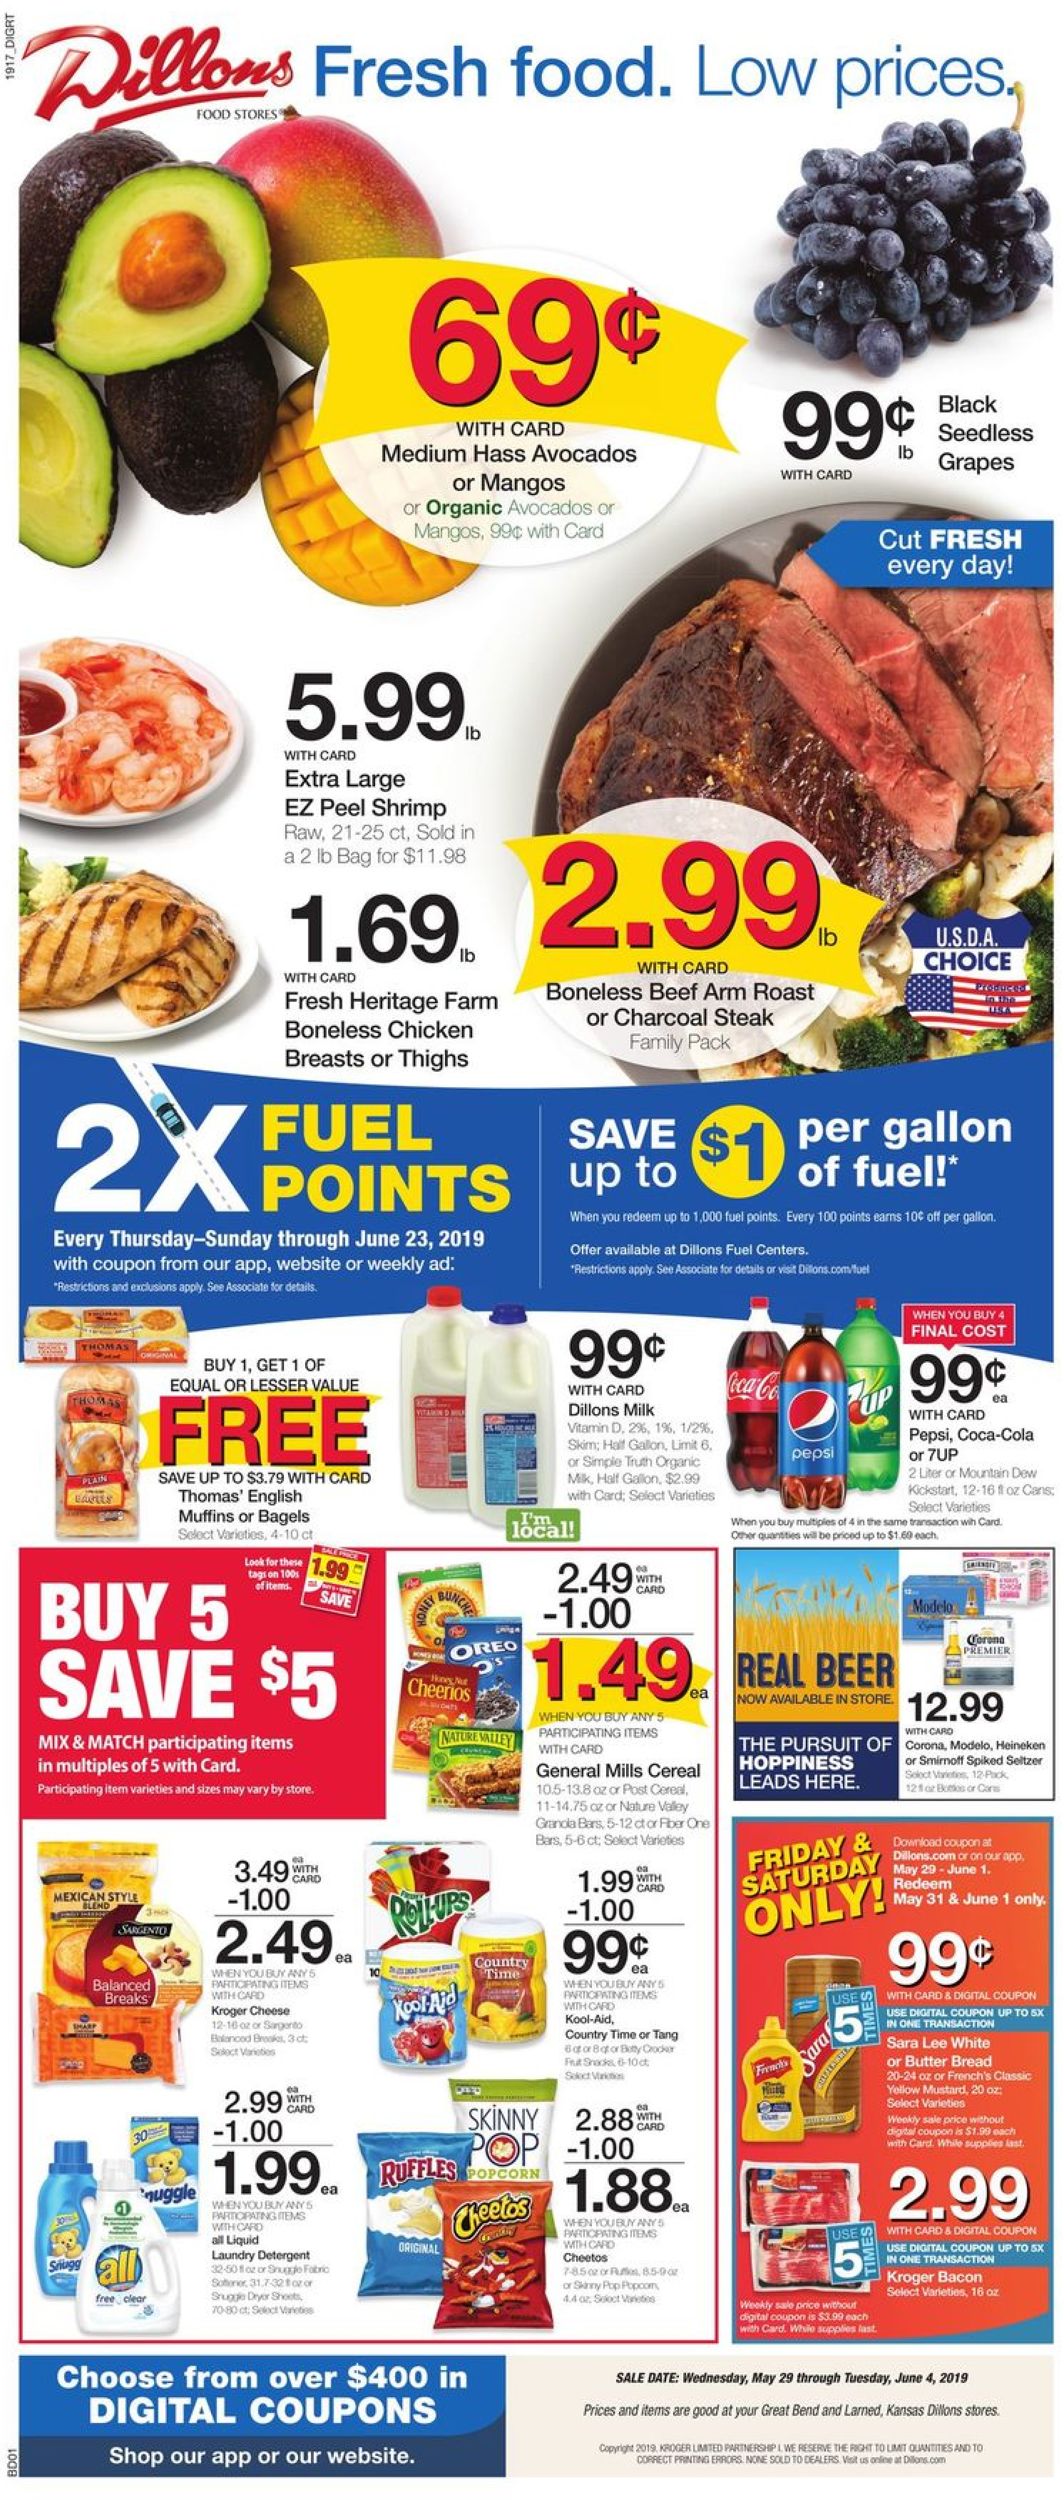 Dillons Current weekly ad 05/29 - 06/04/2019 - weekly-ad ...